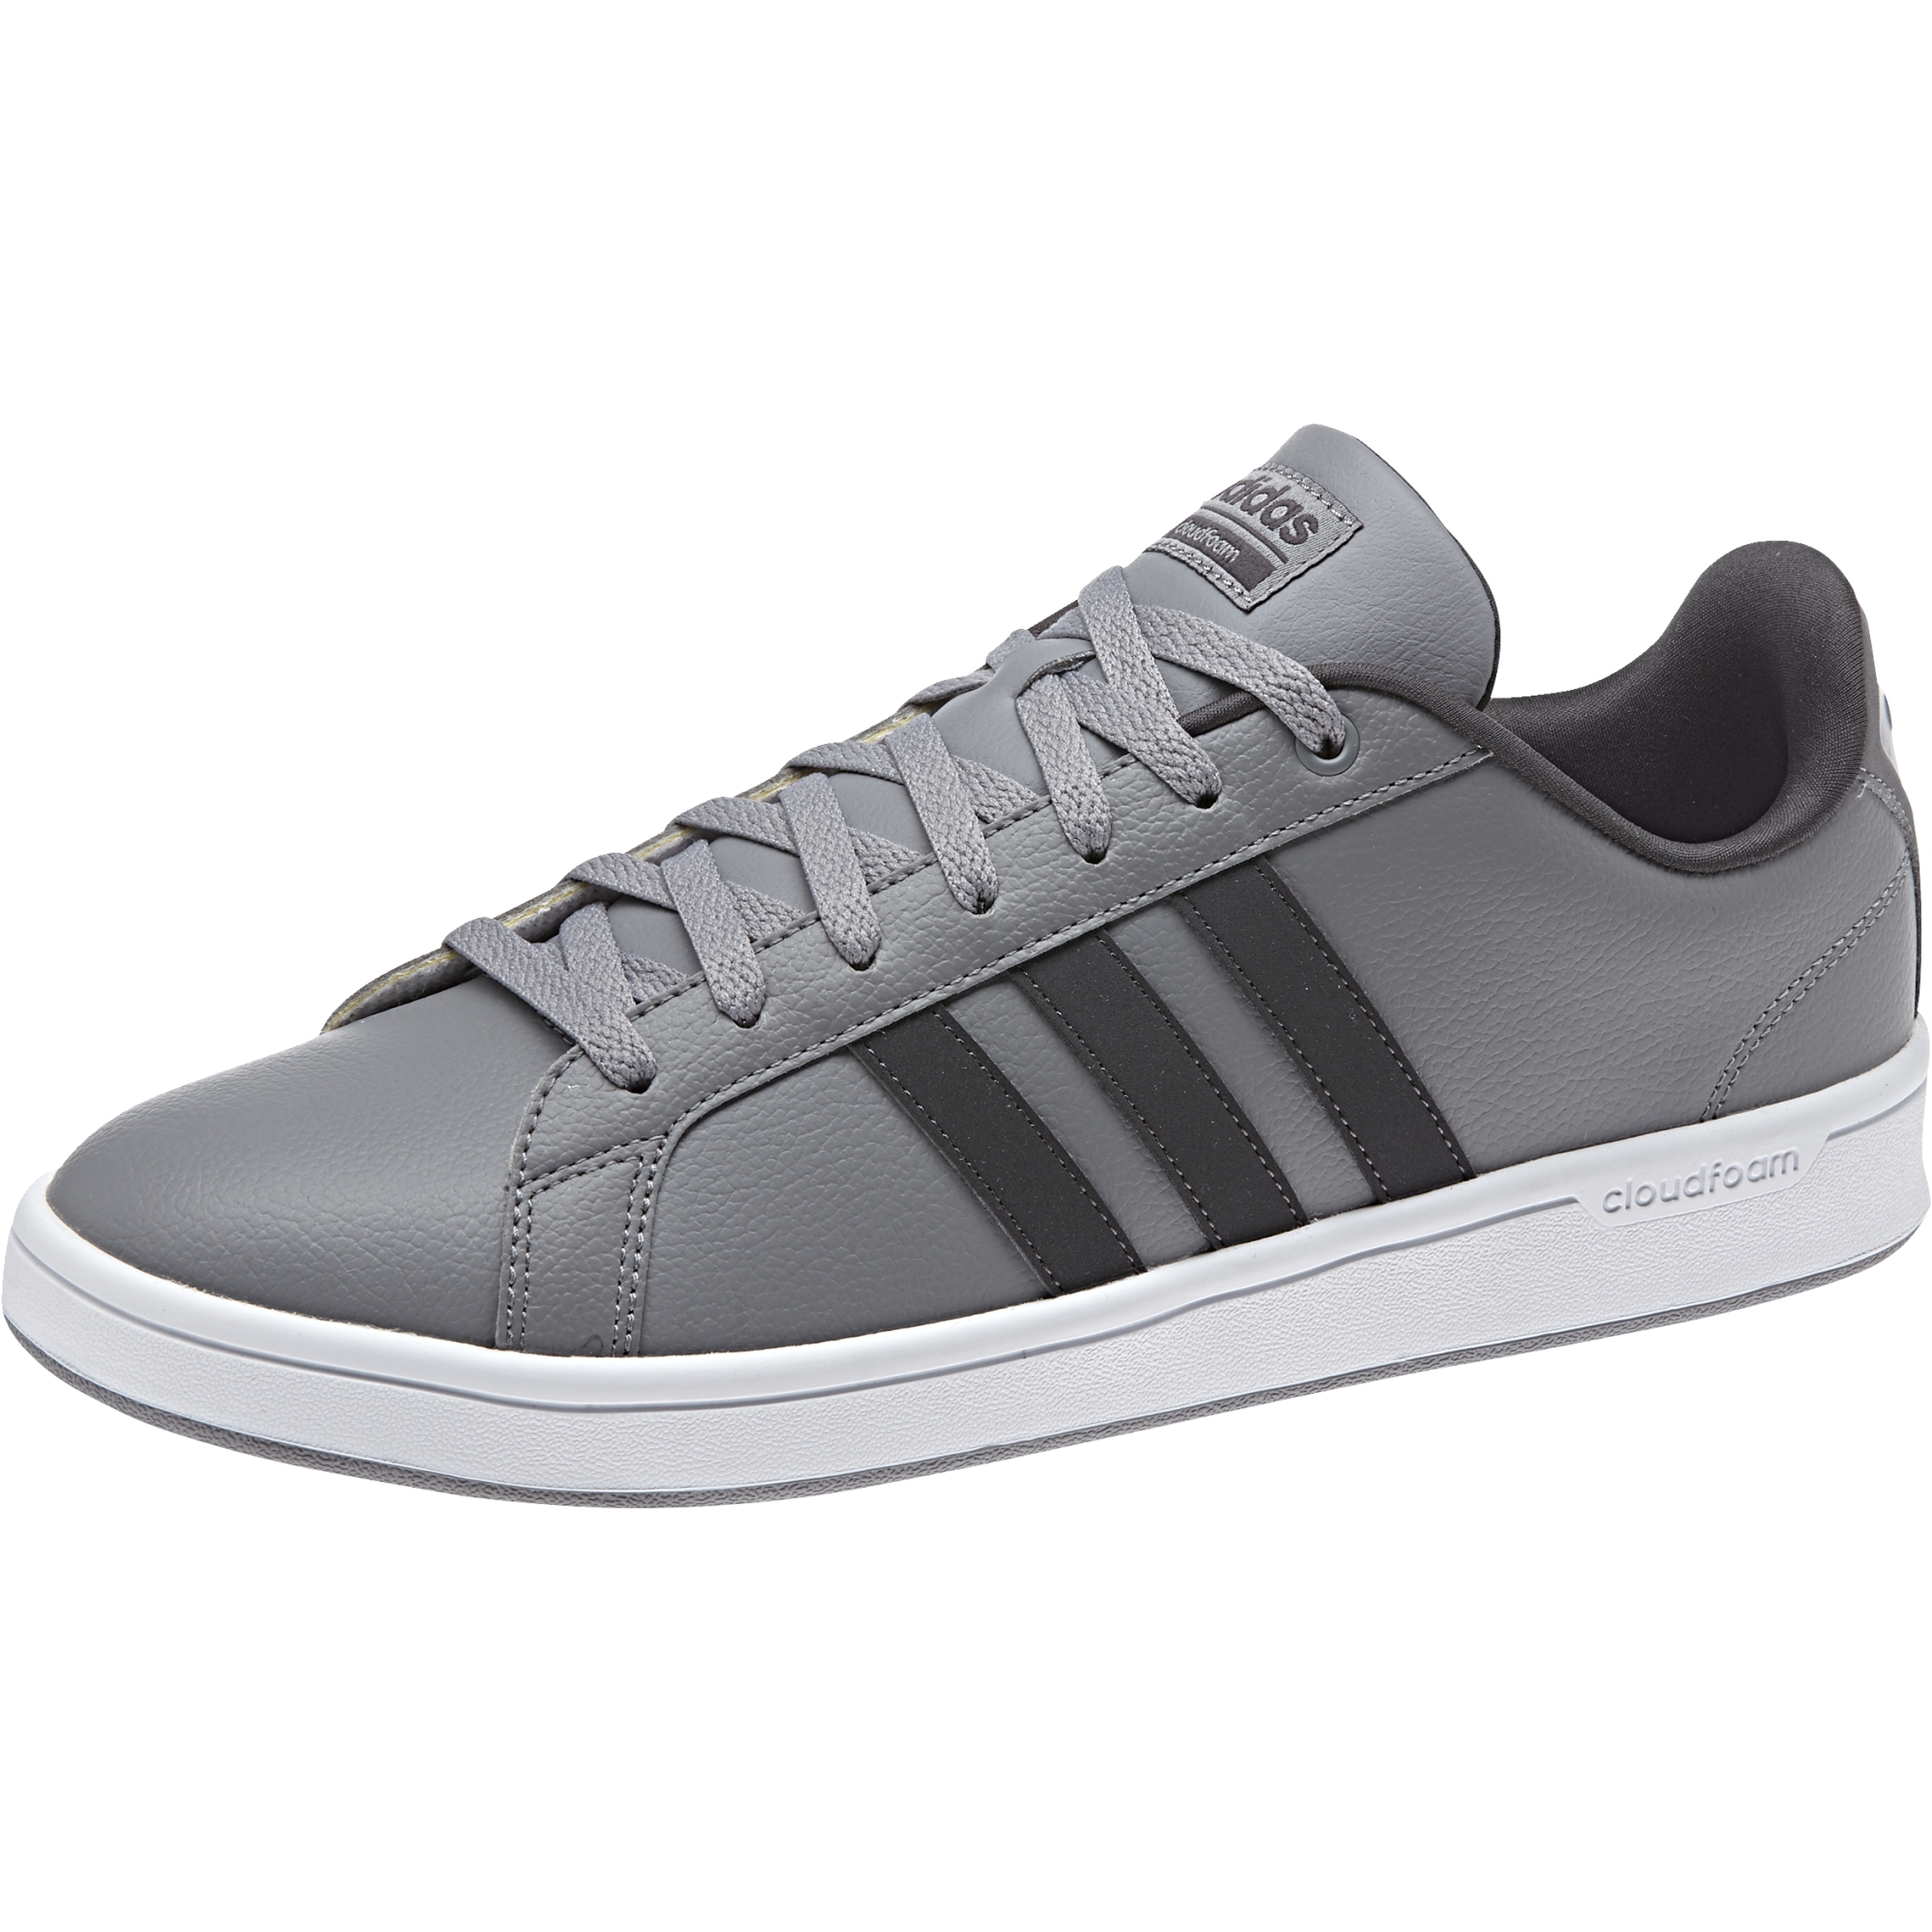 adidas neo pas cher homme